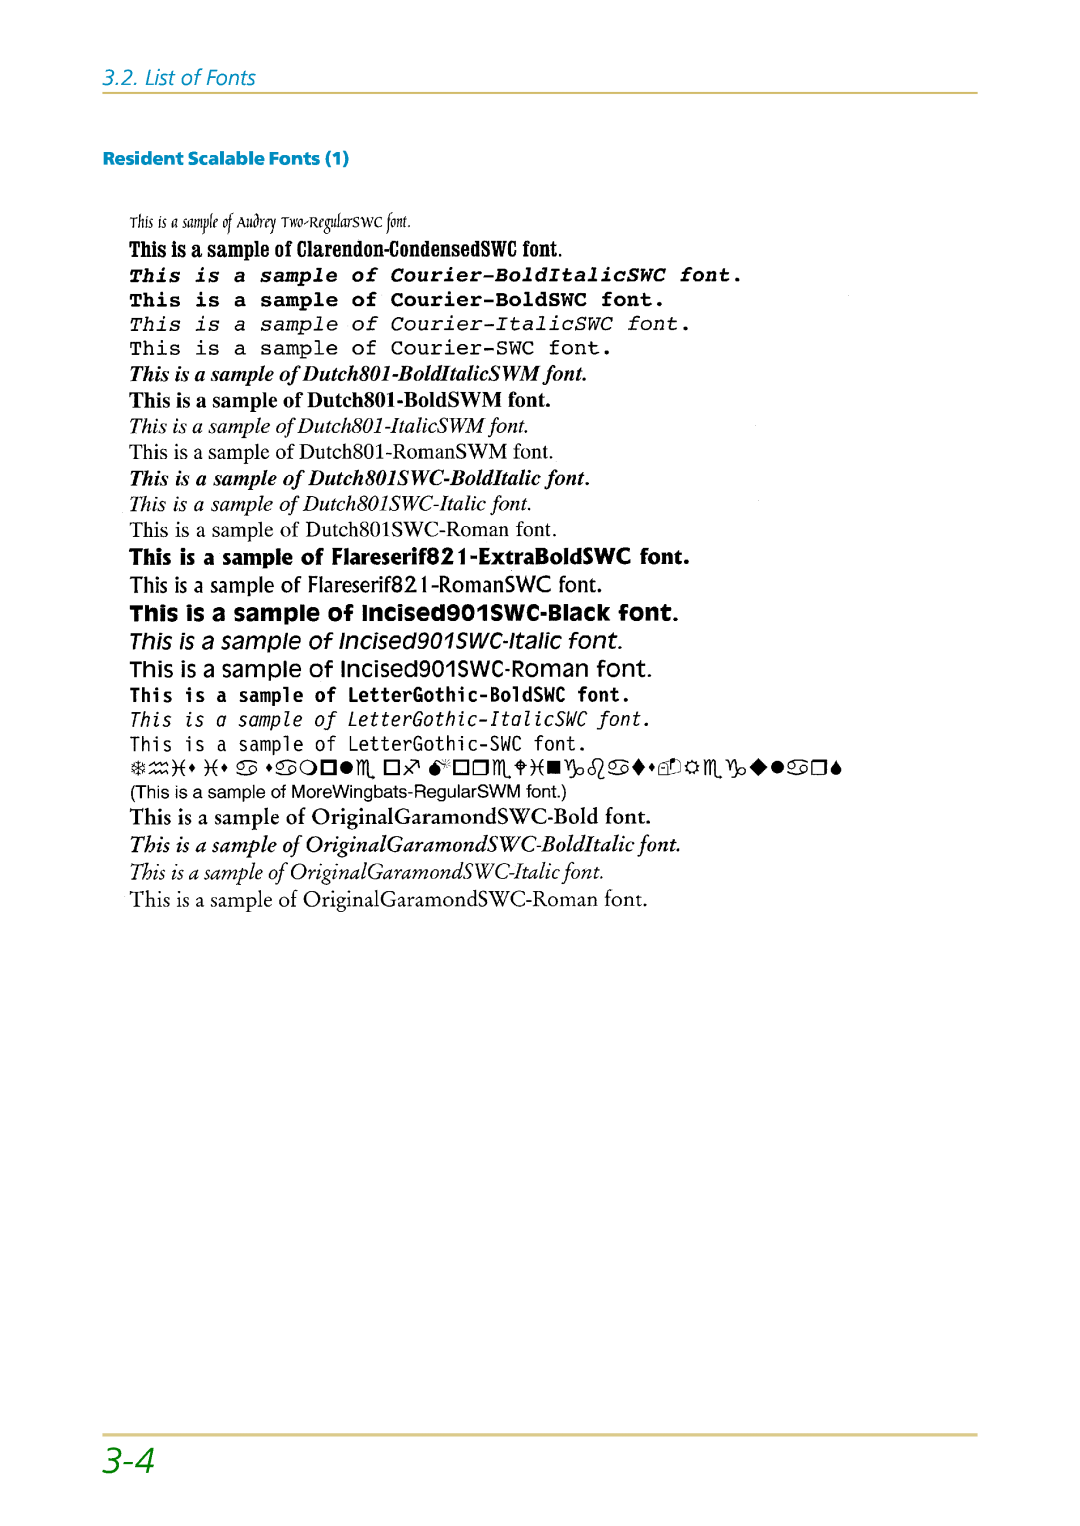 Kyocera FS-1700 user manual List of Fonts, Resident Scalable Fonts 